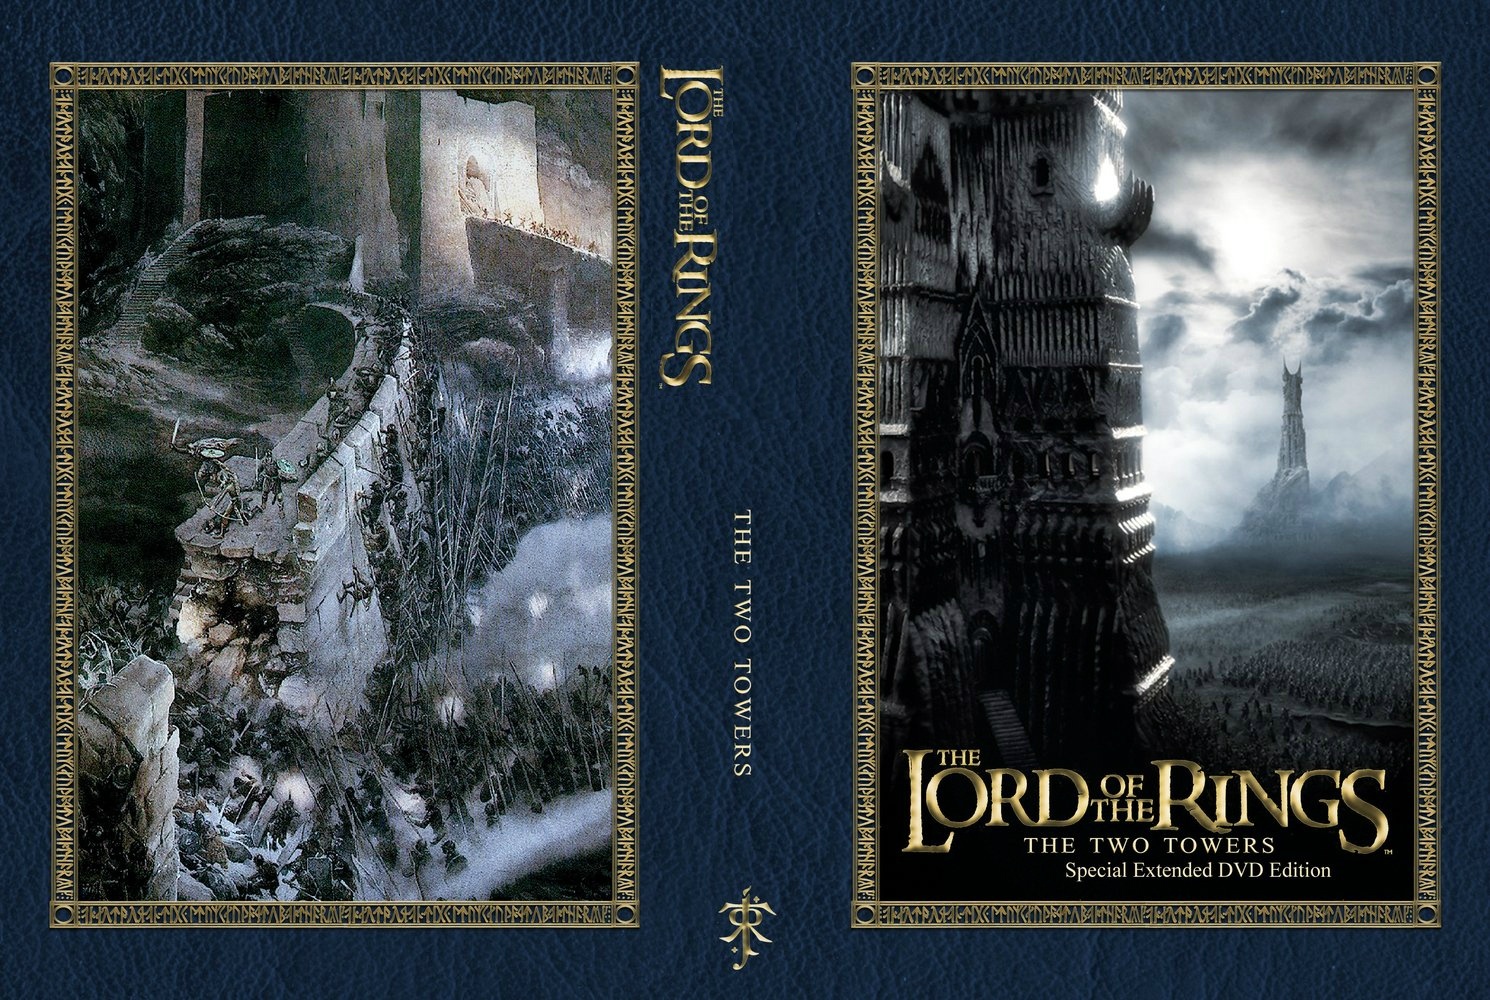 The Lord of the Rings: The Two Towers box cover